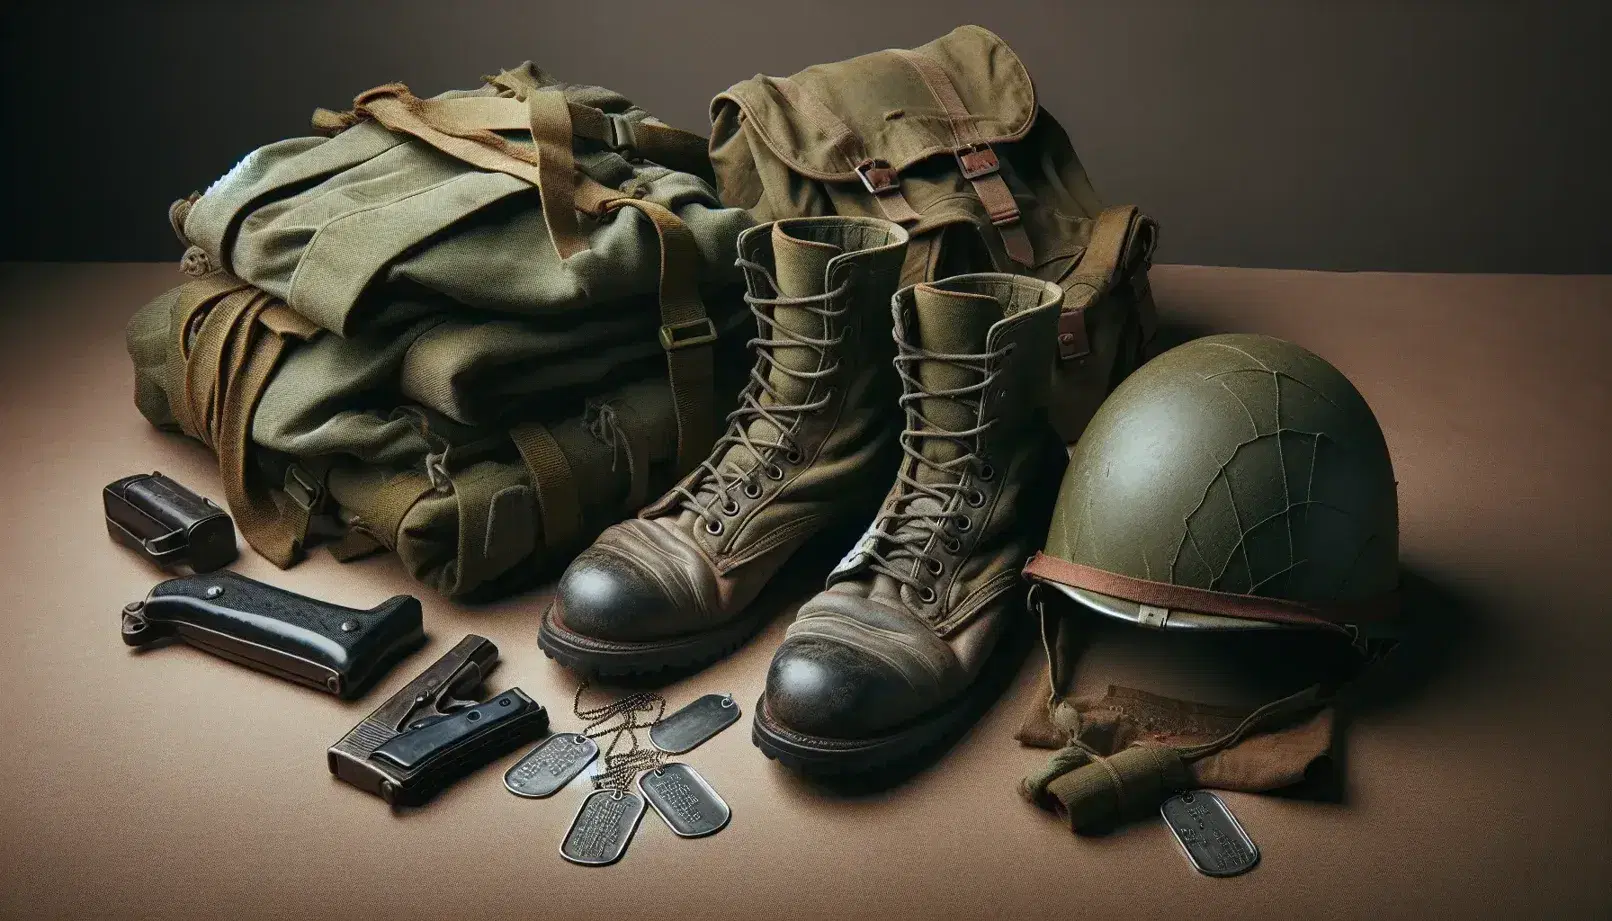 Vietnam War era military gear arranged on a plain background, including worn combat boots, M-60 helmet, dog tags, rucksack, canteen, and fatigues.